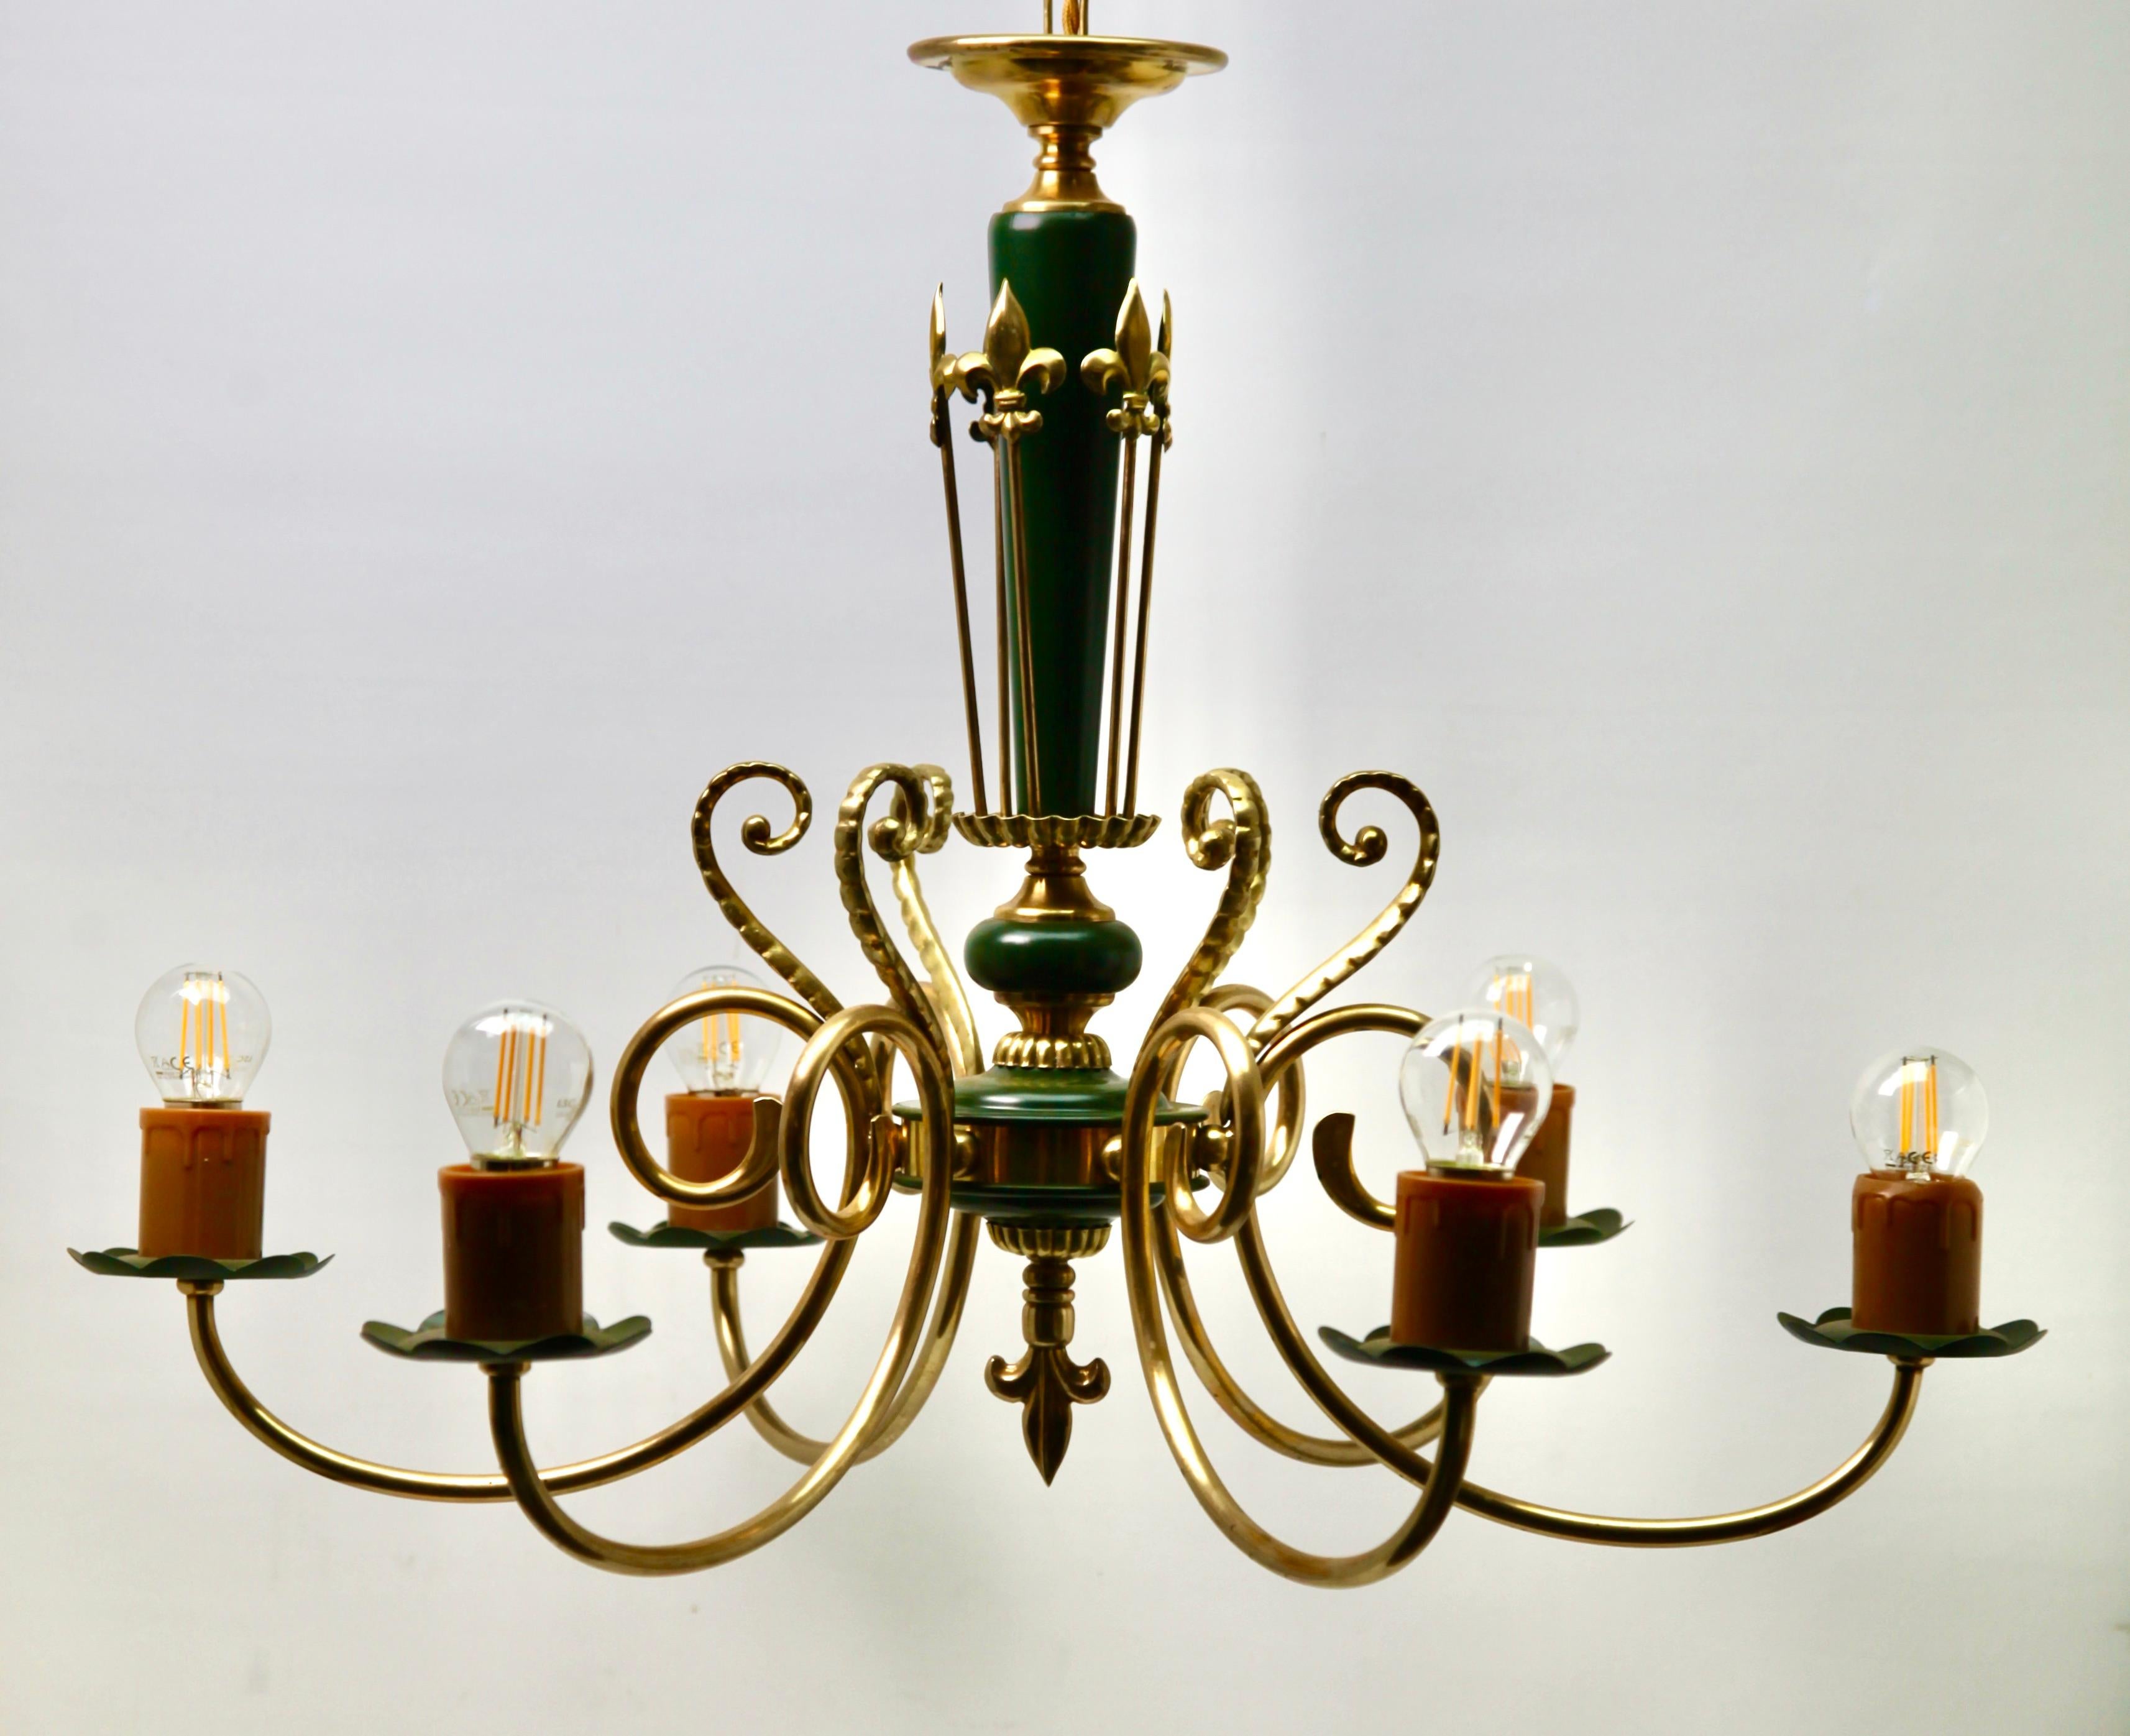 Six arms chandelier brass and wooden details
Photography fails to capture the simple elegant illumination provided by this lamp.

Recently cleaned and polished so that it is in excellent condition and in working order having also
been re-wired